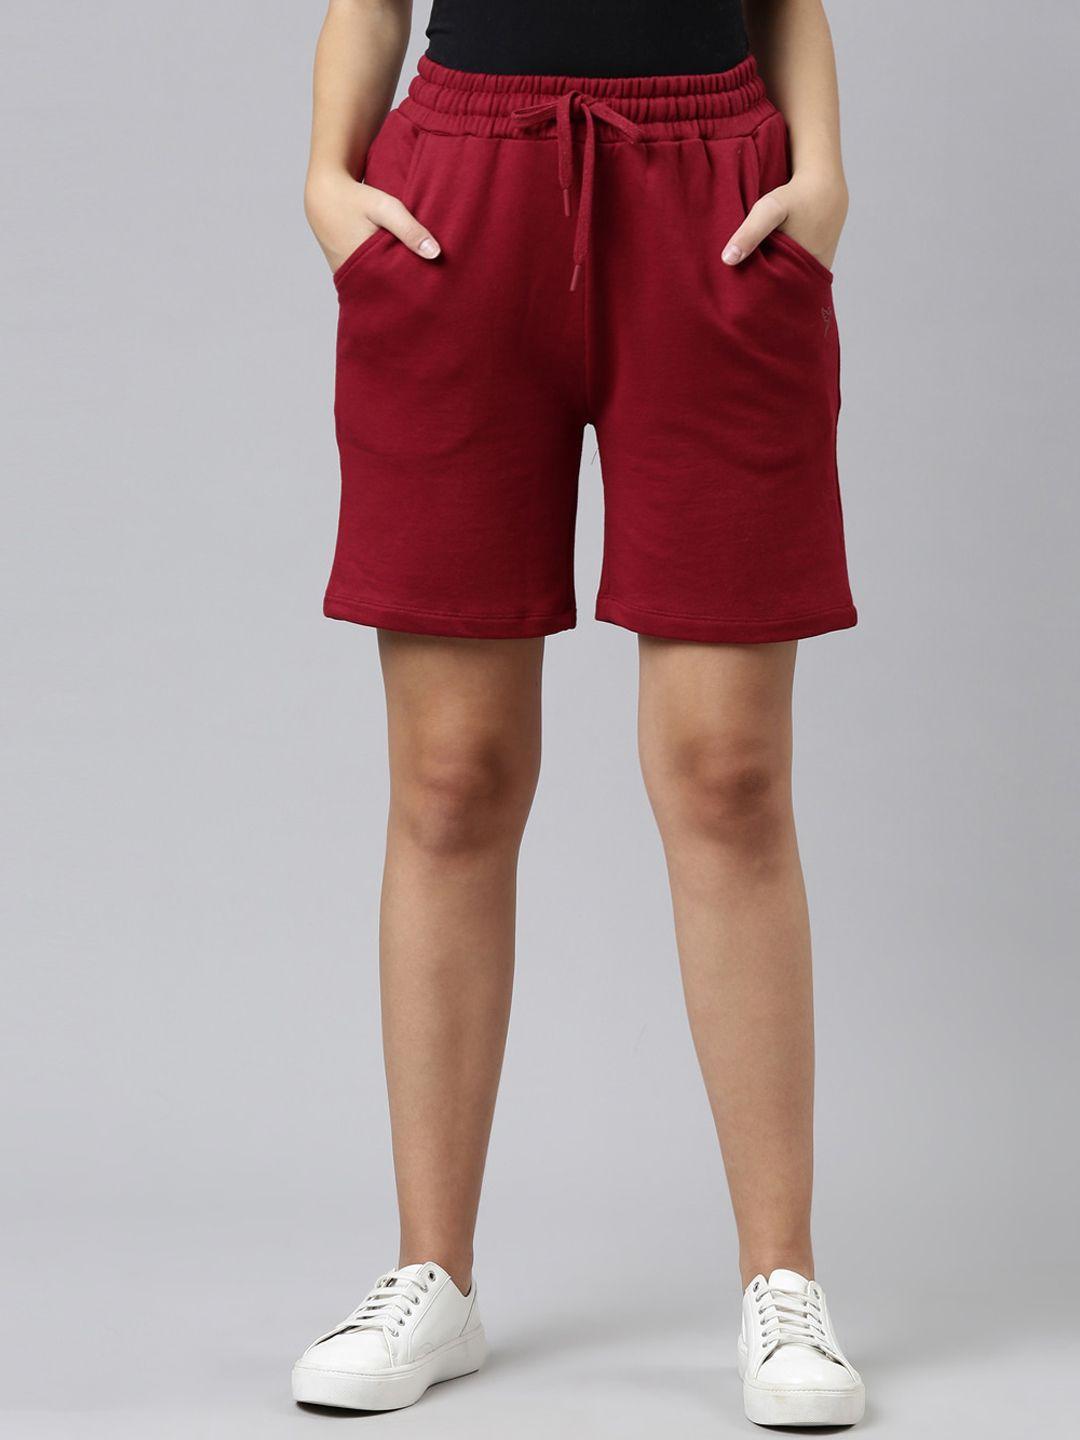 twin-birds-women-flared-above-knee-pure-cotton-shorts